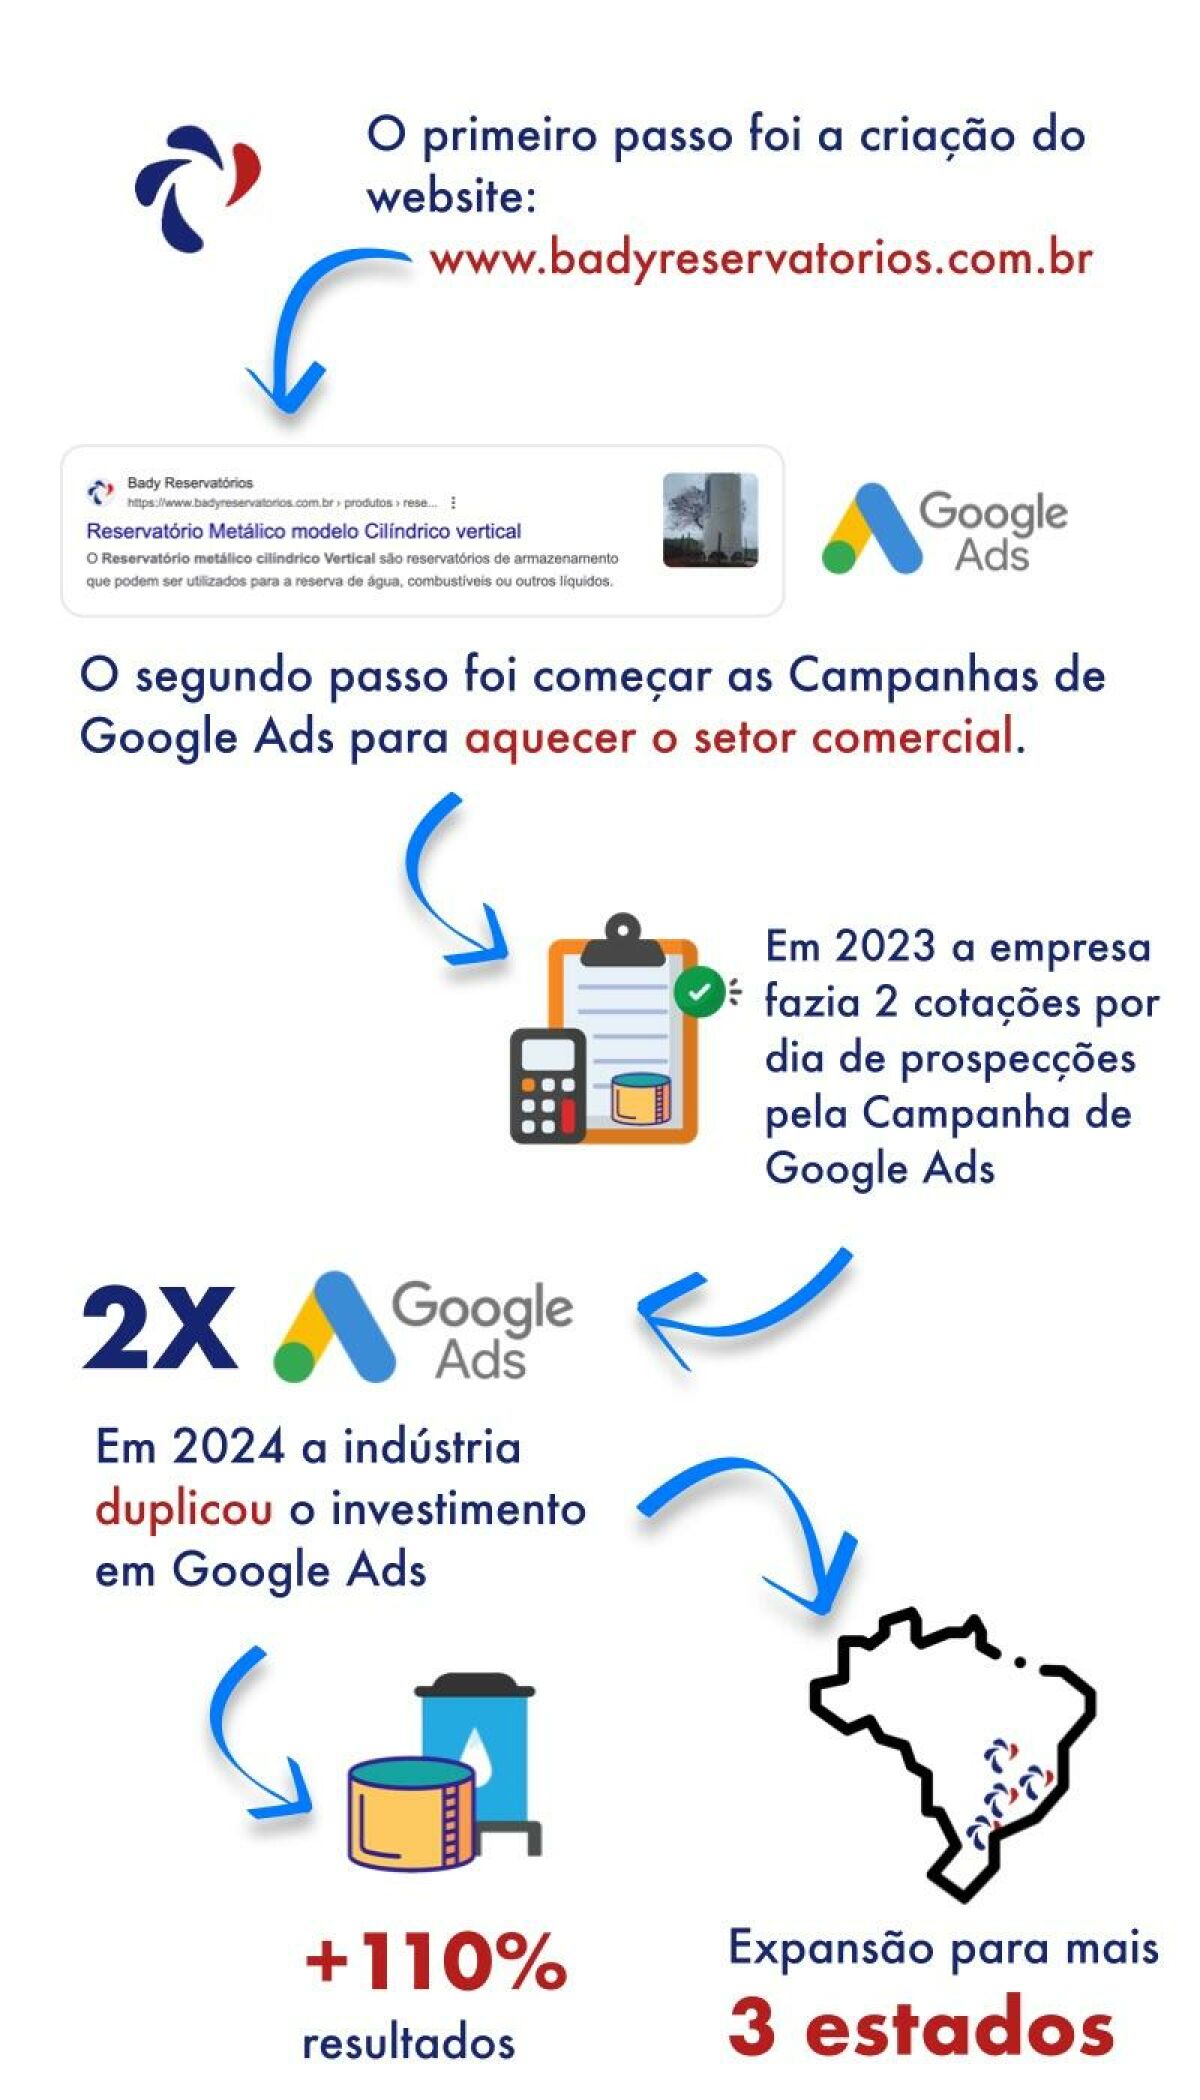 Main image from Success story: How an industry in São Paulo is using the internet to increase its revenue and expand